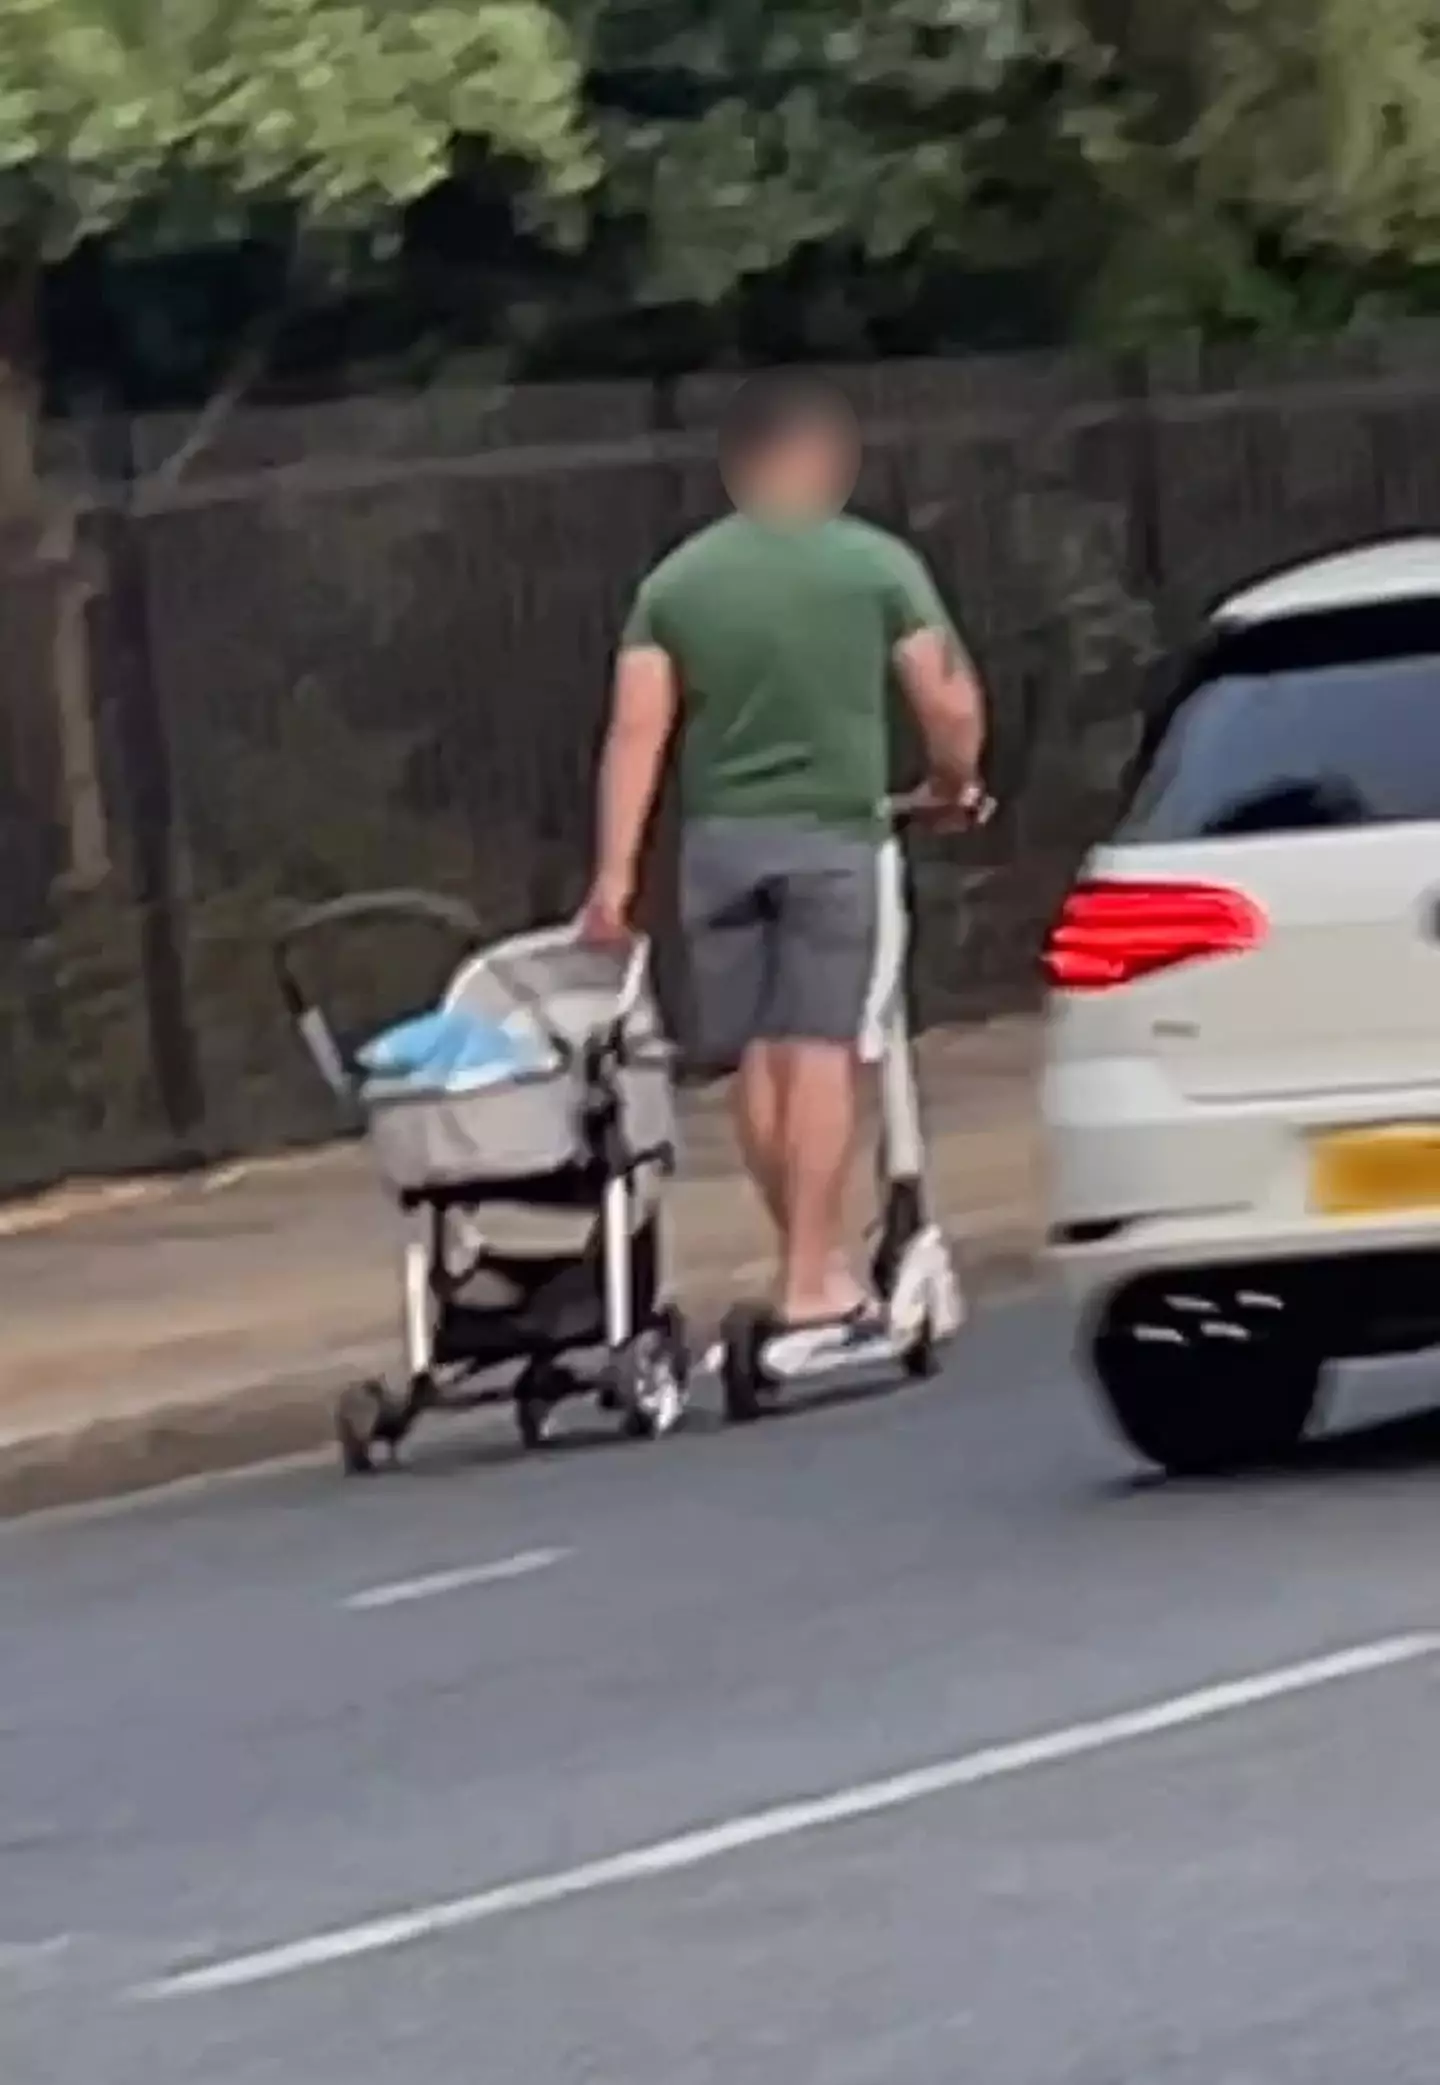 Cars brushed close past the man and his pram.